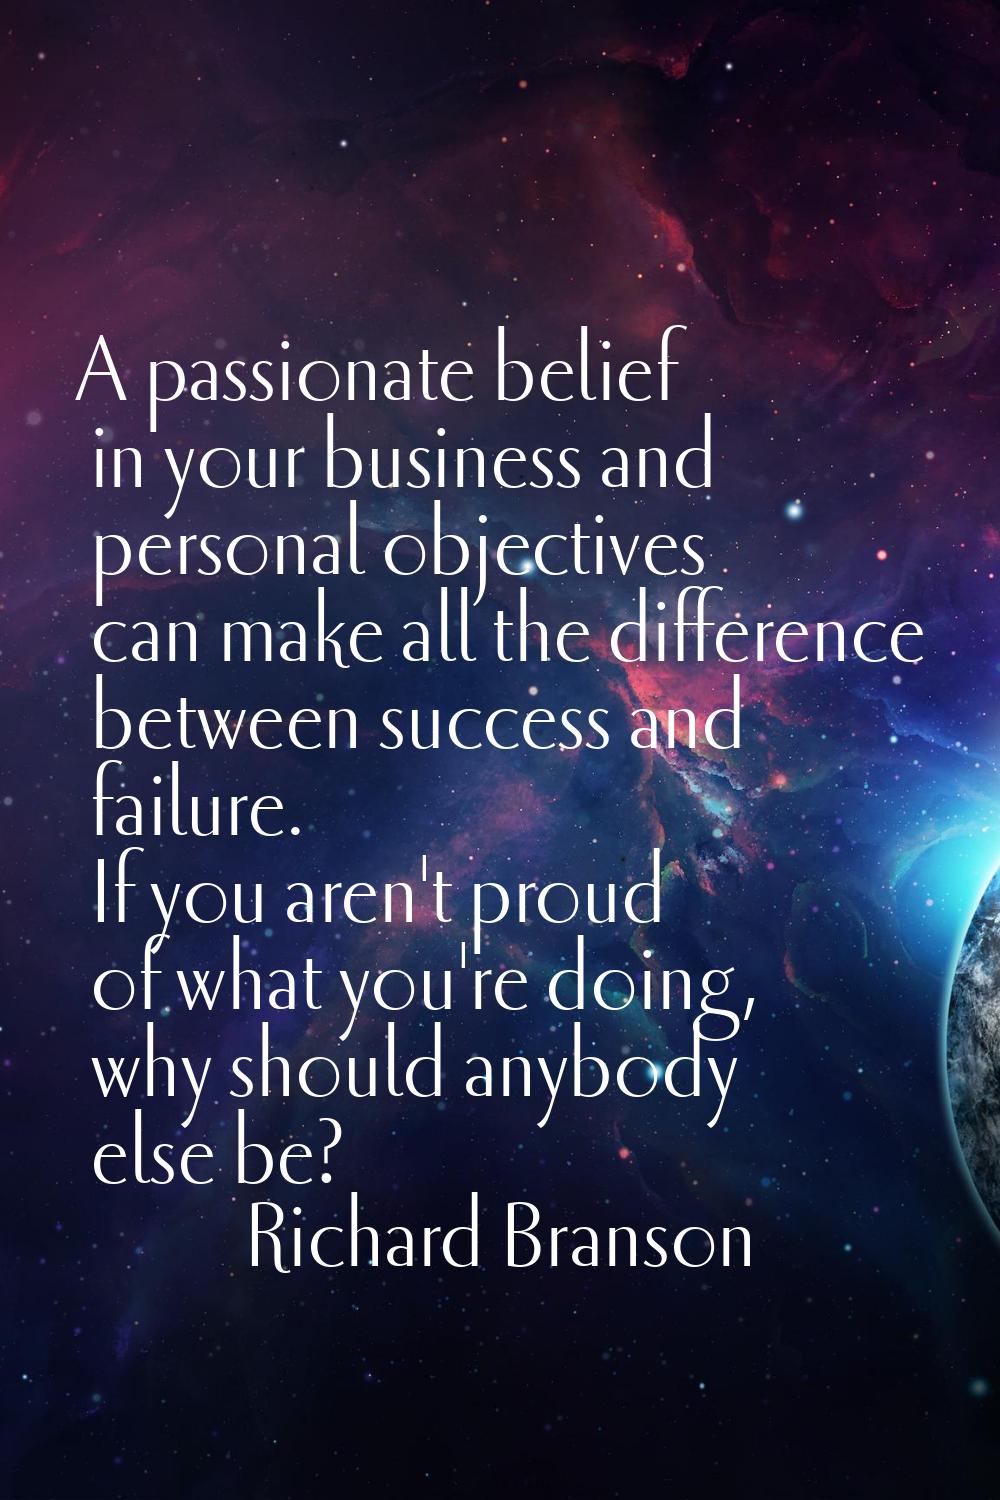 A passionate belief in your business and personal objectives can make all the difference between su